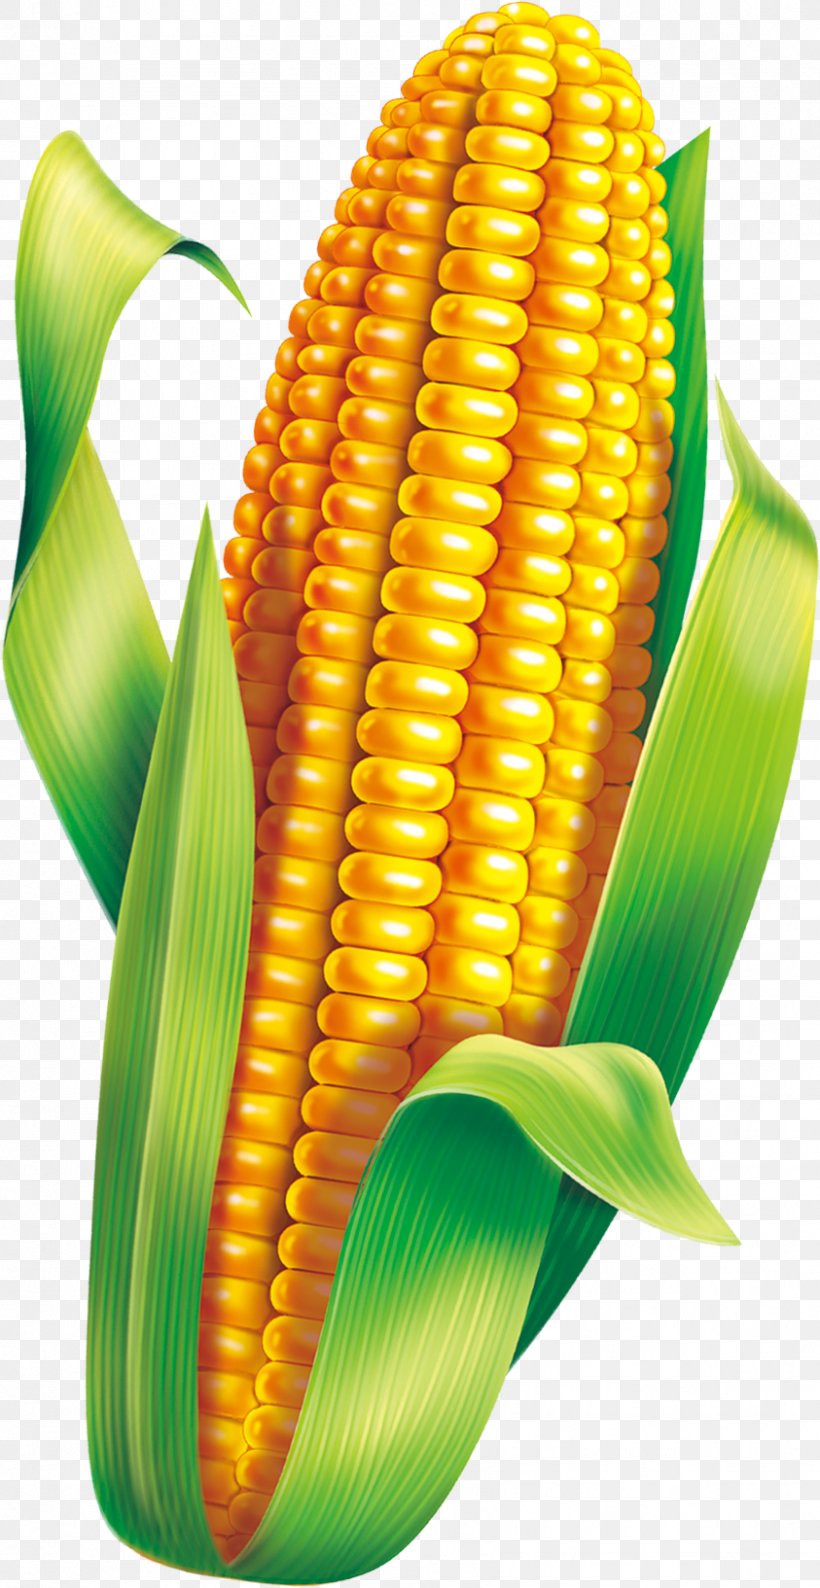 Corn On The Cob Maize Congee Breakfast, PNG, 843x1633px, Corn On The Cob, Breakfast, Caryopsis, Commodity, Congee Download Free